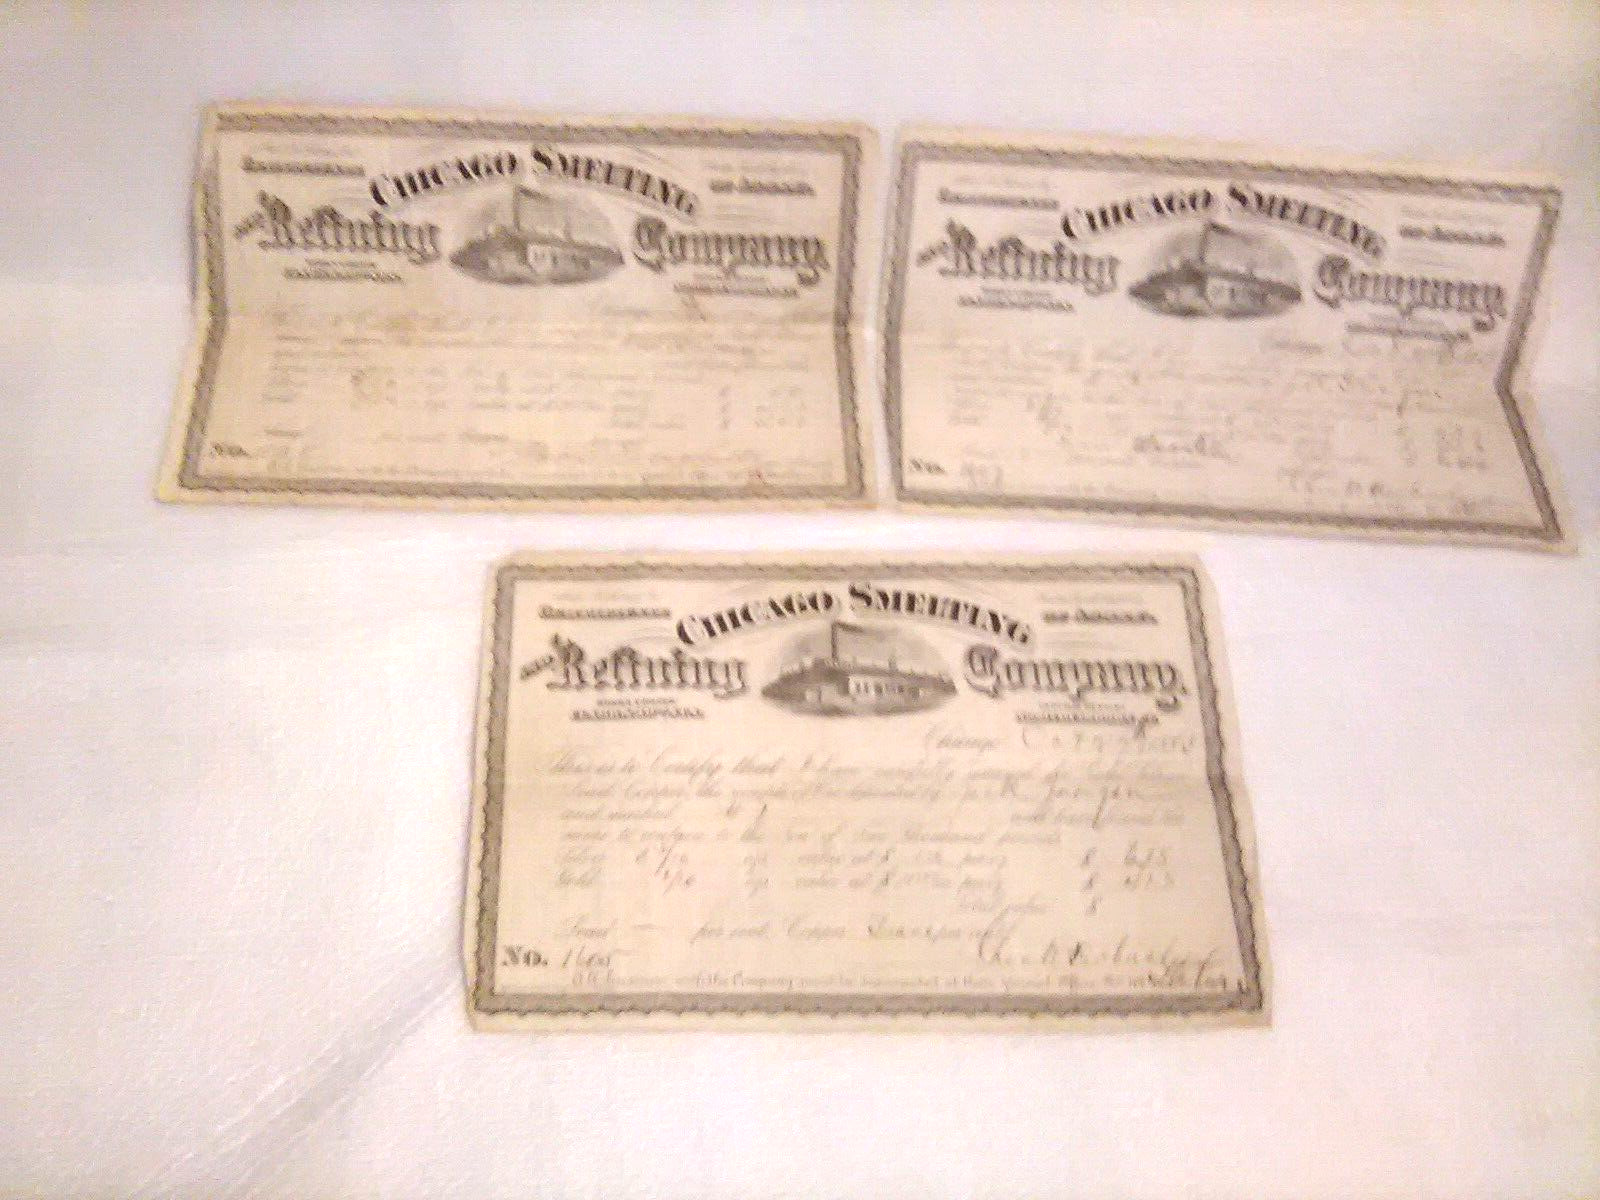 Rare Gold assay certs from 1880's, Ephemera treasures never offered on ebay